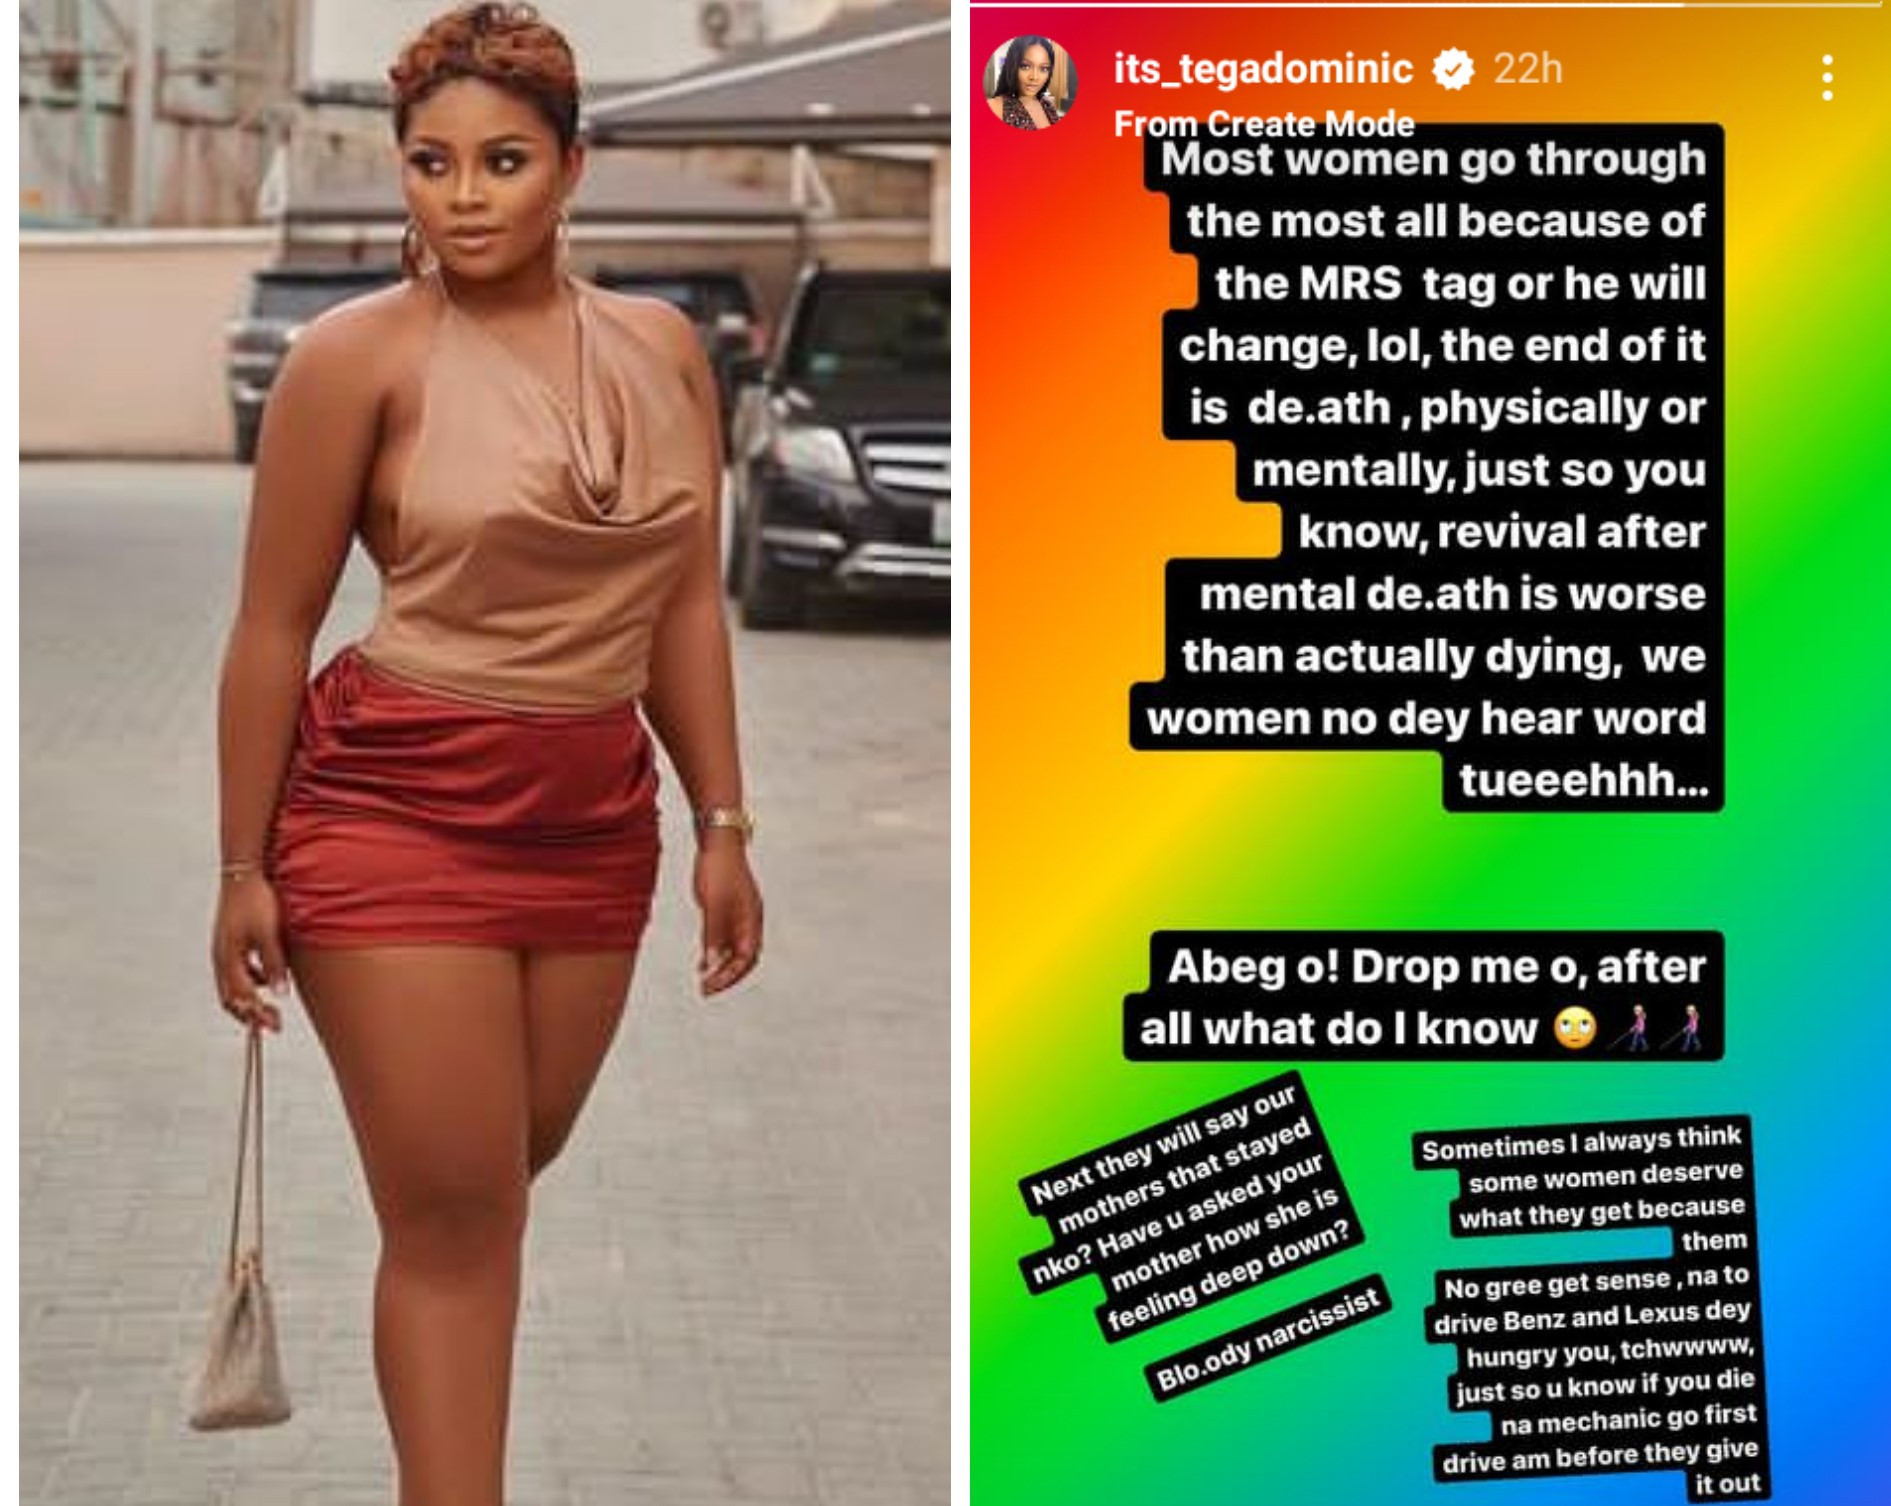 Domestic violence: Some women deserve what they get because they refuse to leave abusive marriages - BBNaija Tega Dominic says